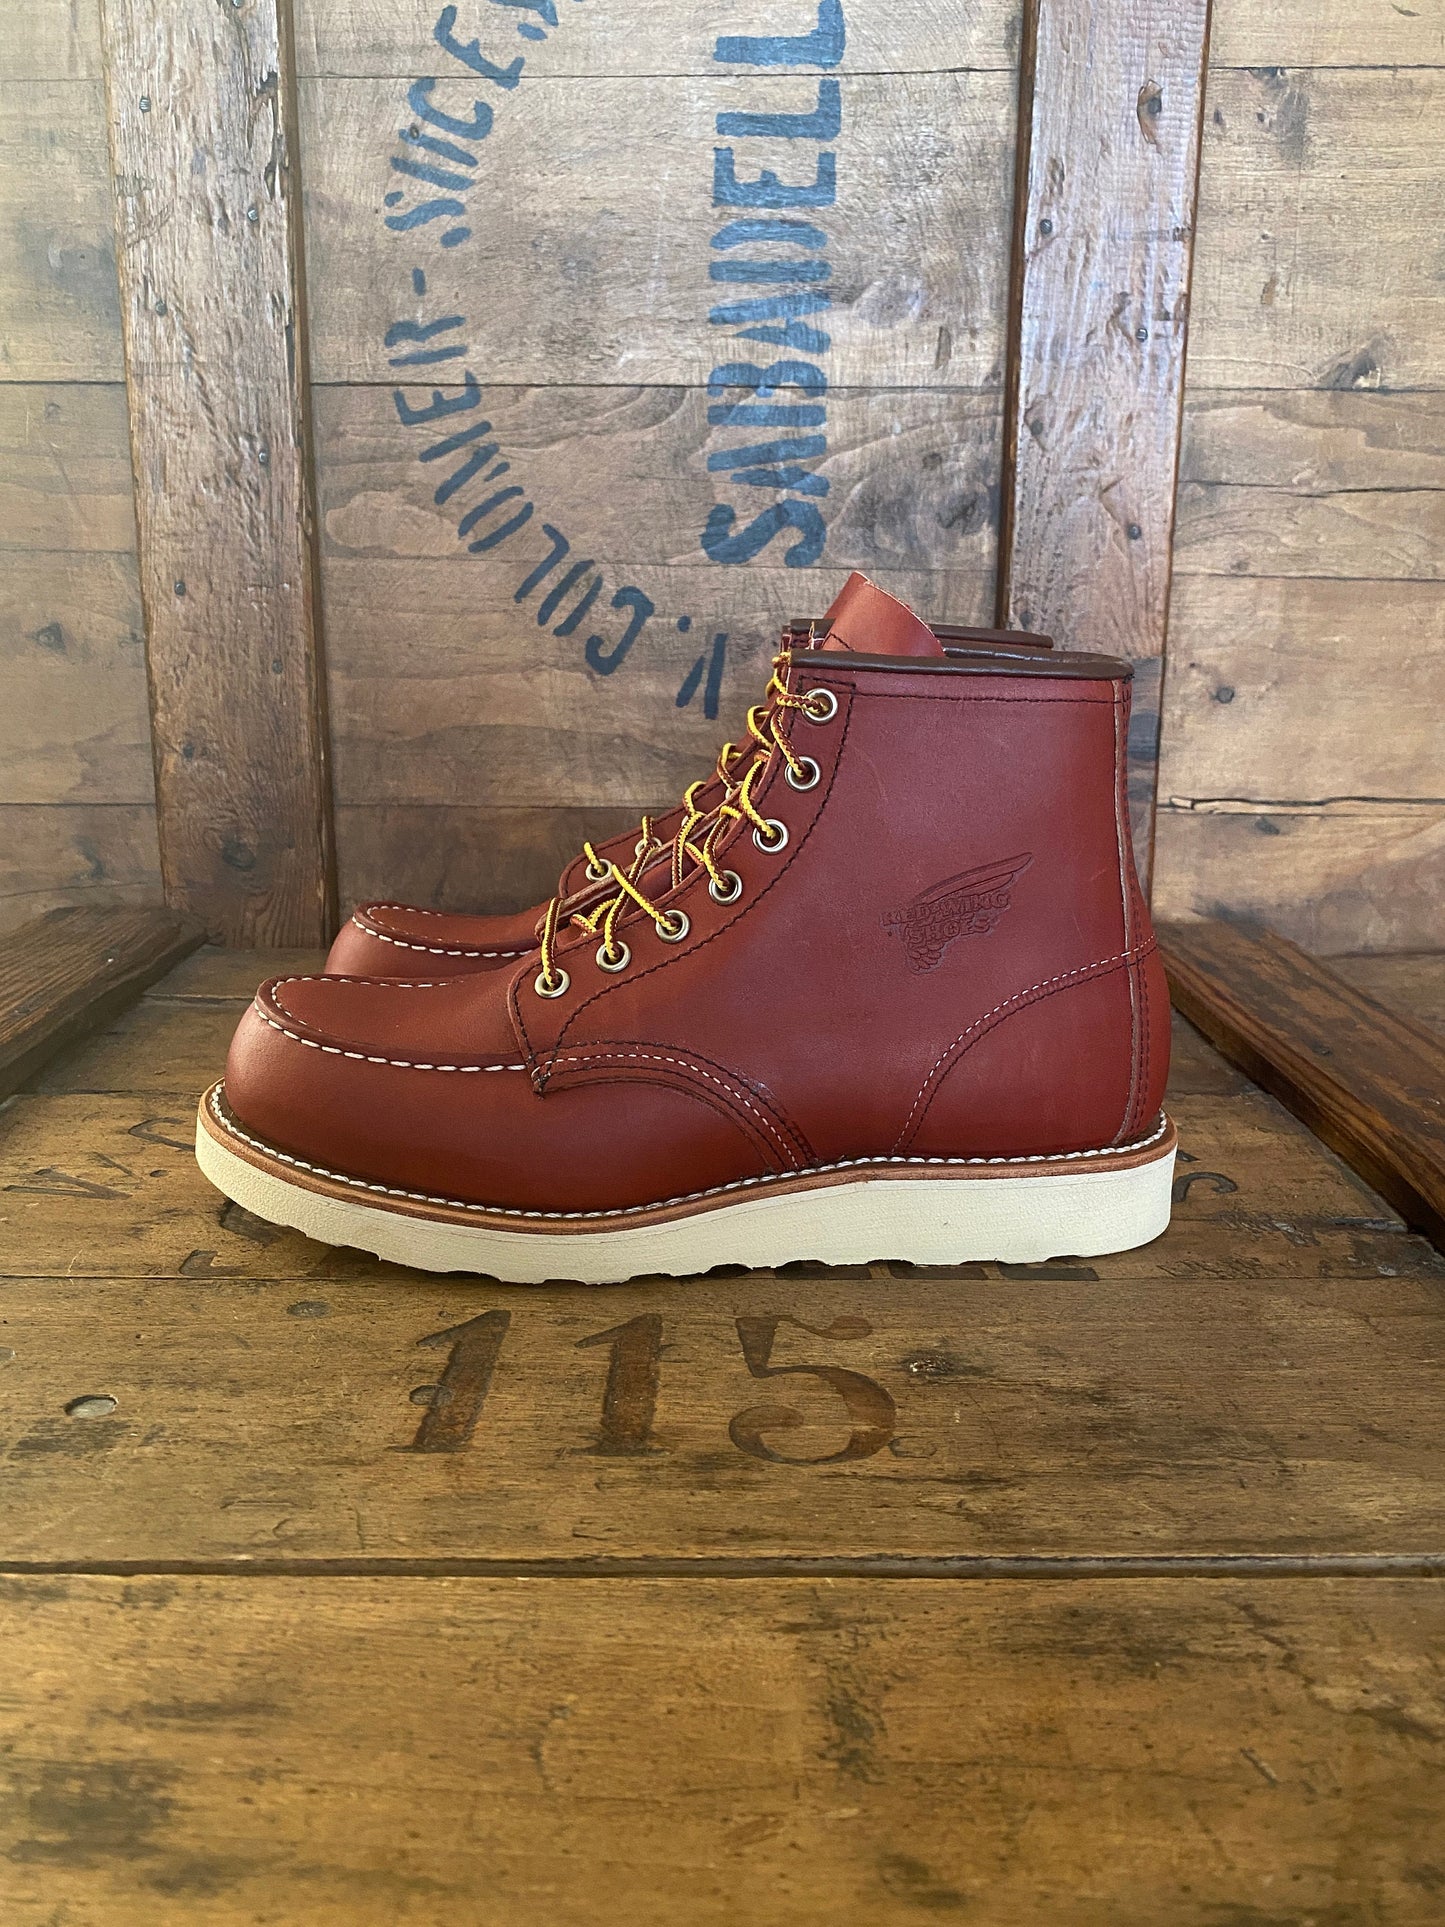 Size 6.5D (38.5 Euro) Red Wing 8131 Moc Toe Oro Russet Boots Made In USA (Seconds)